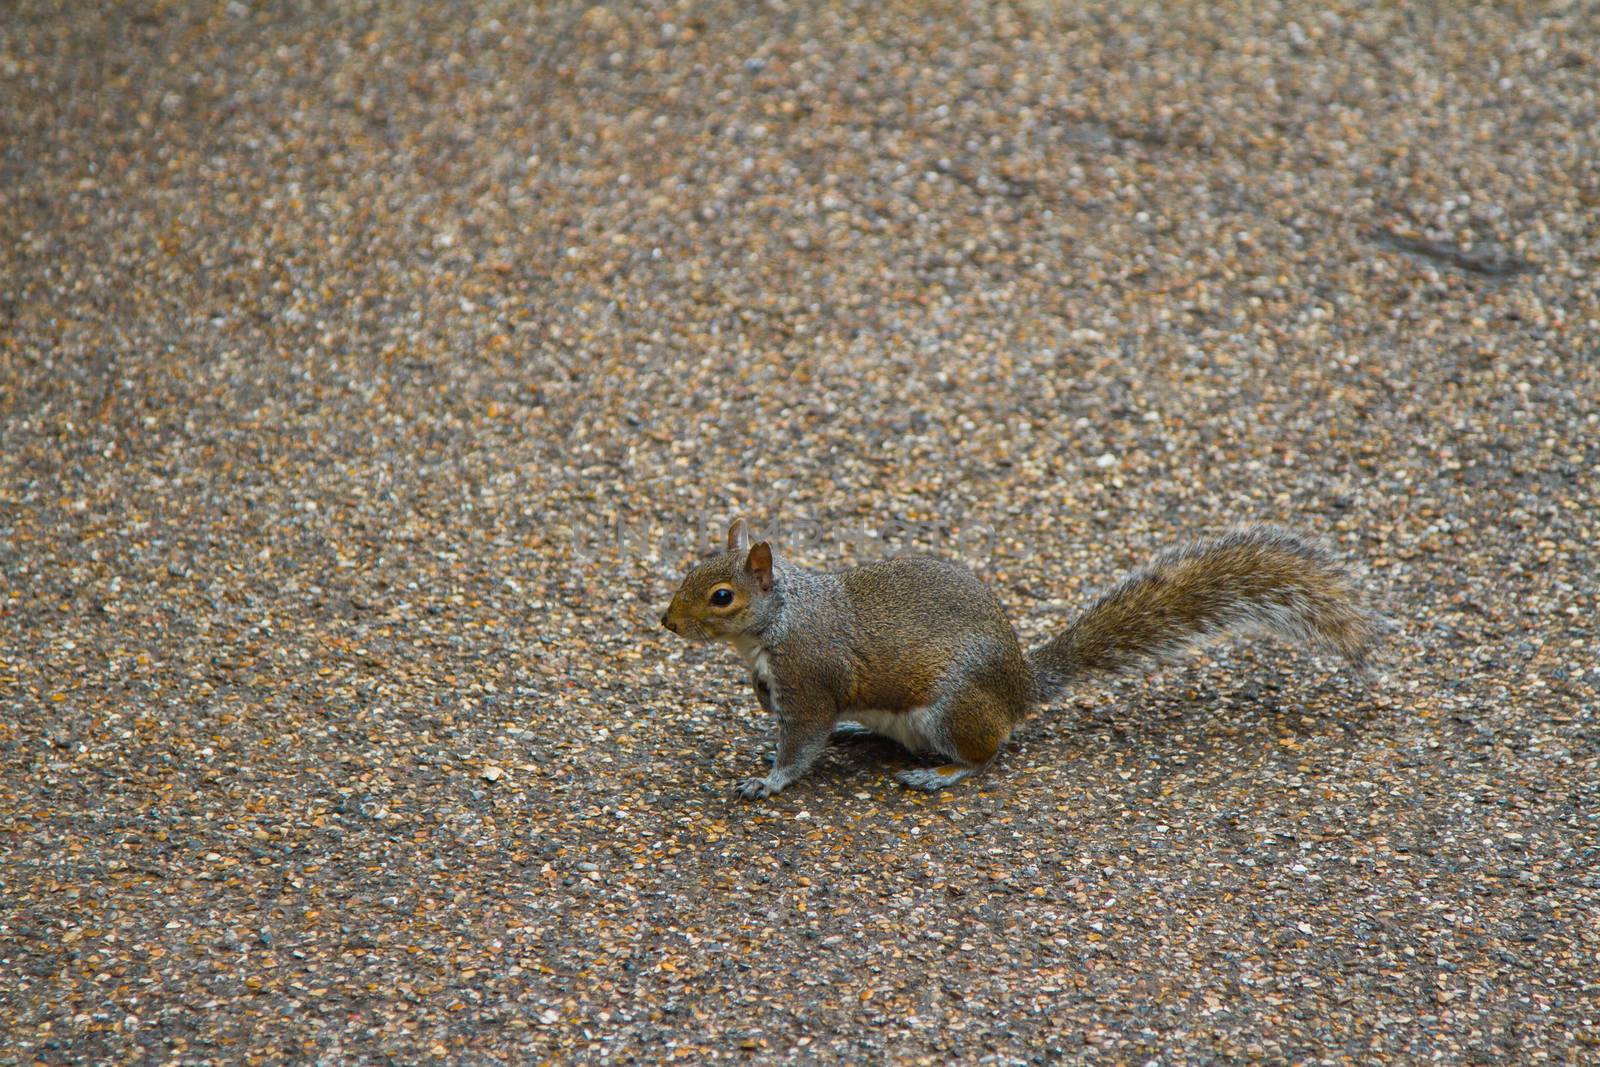 Squirrel on the path in a park